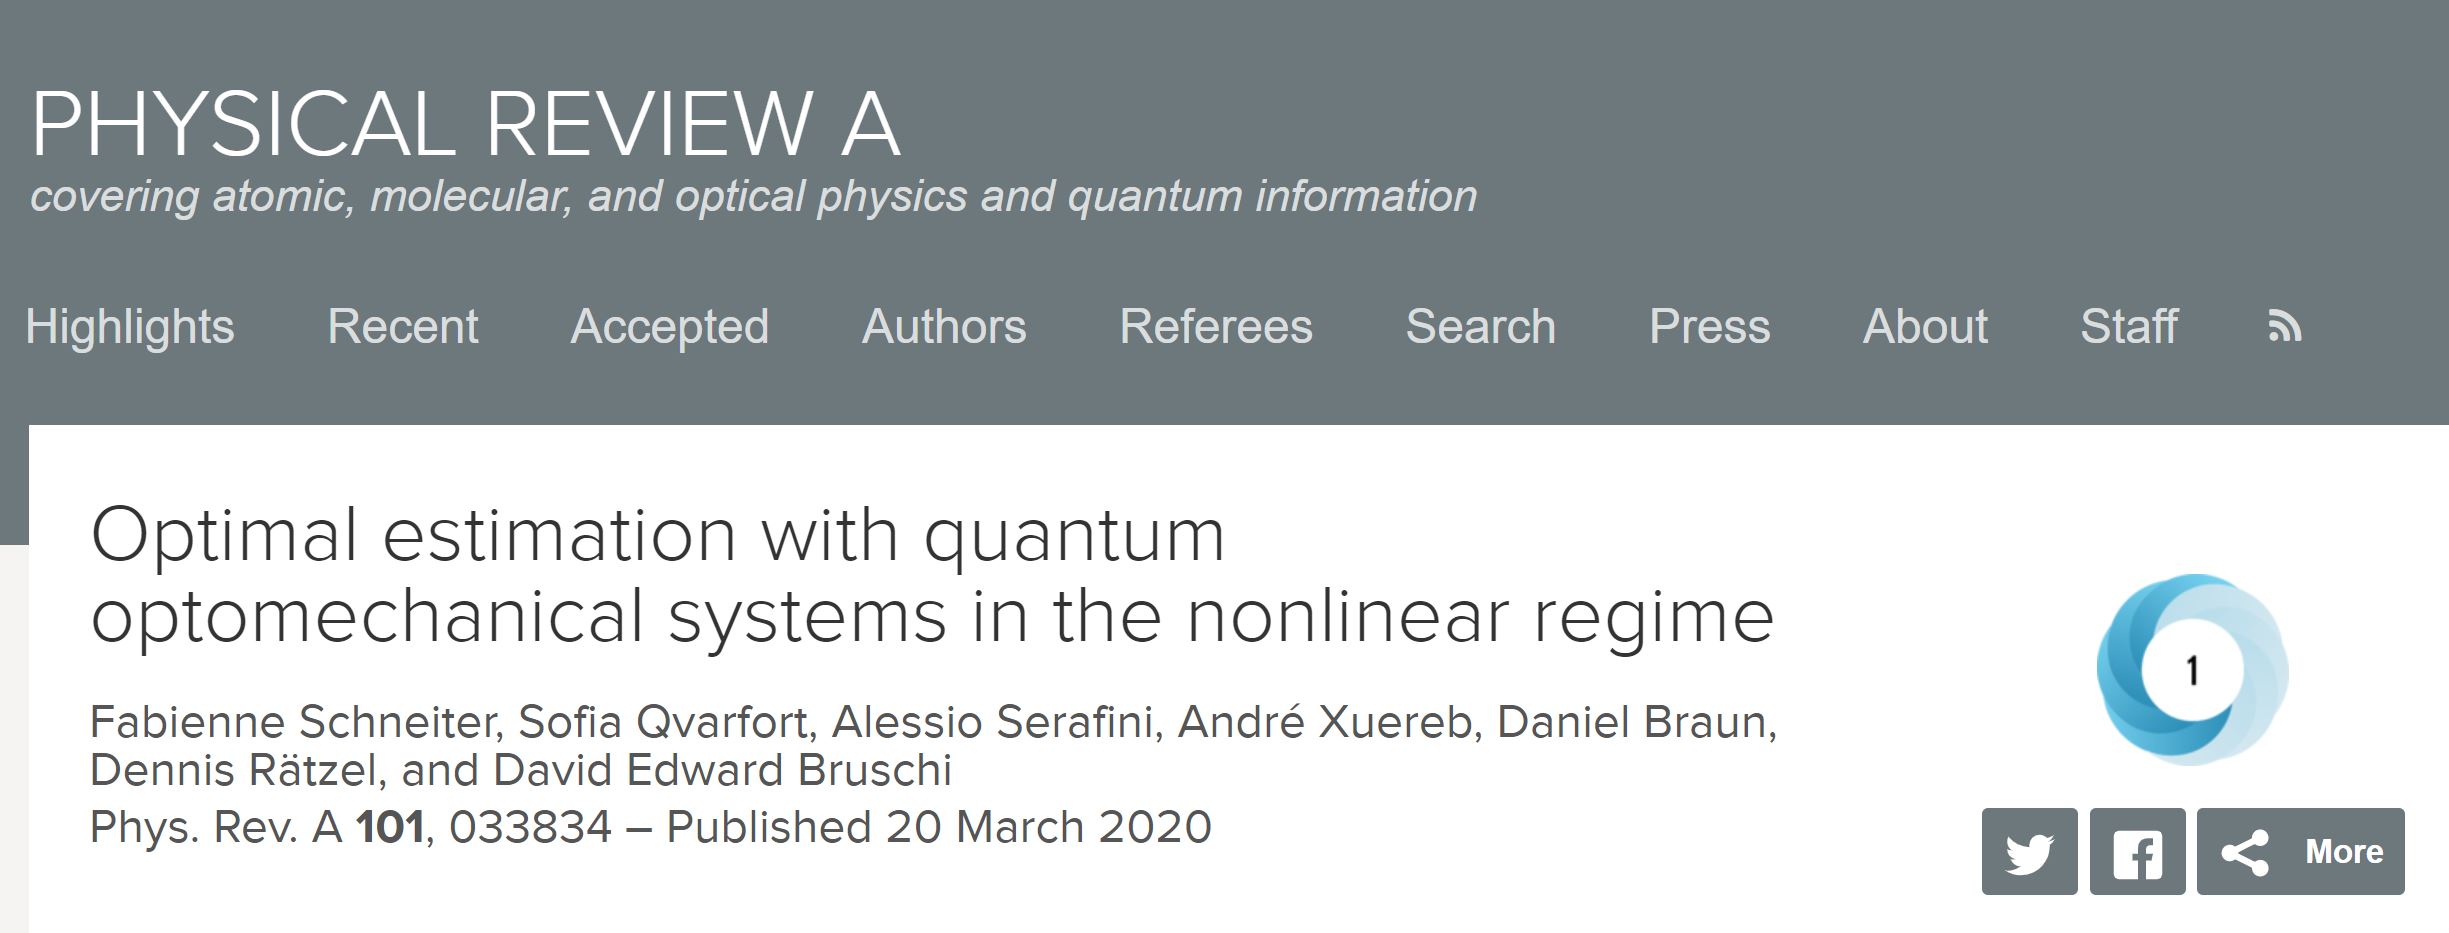 Optimal estimation with quantum optomechanical systems in the nonlinear regime